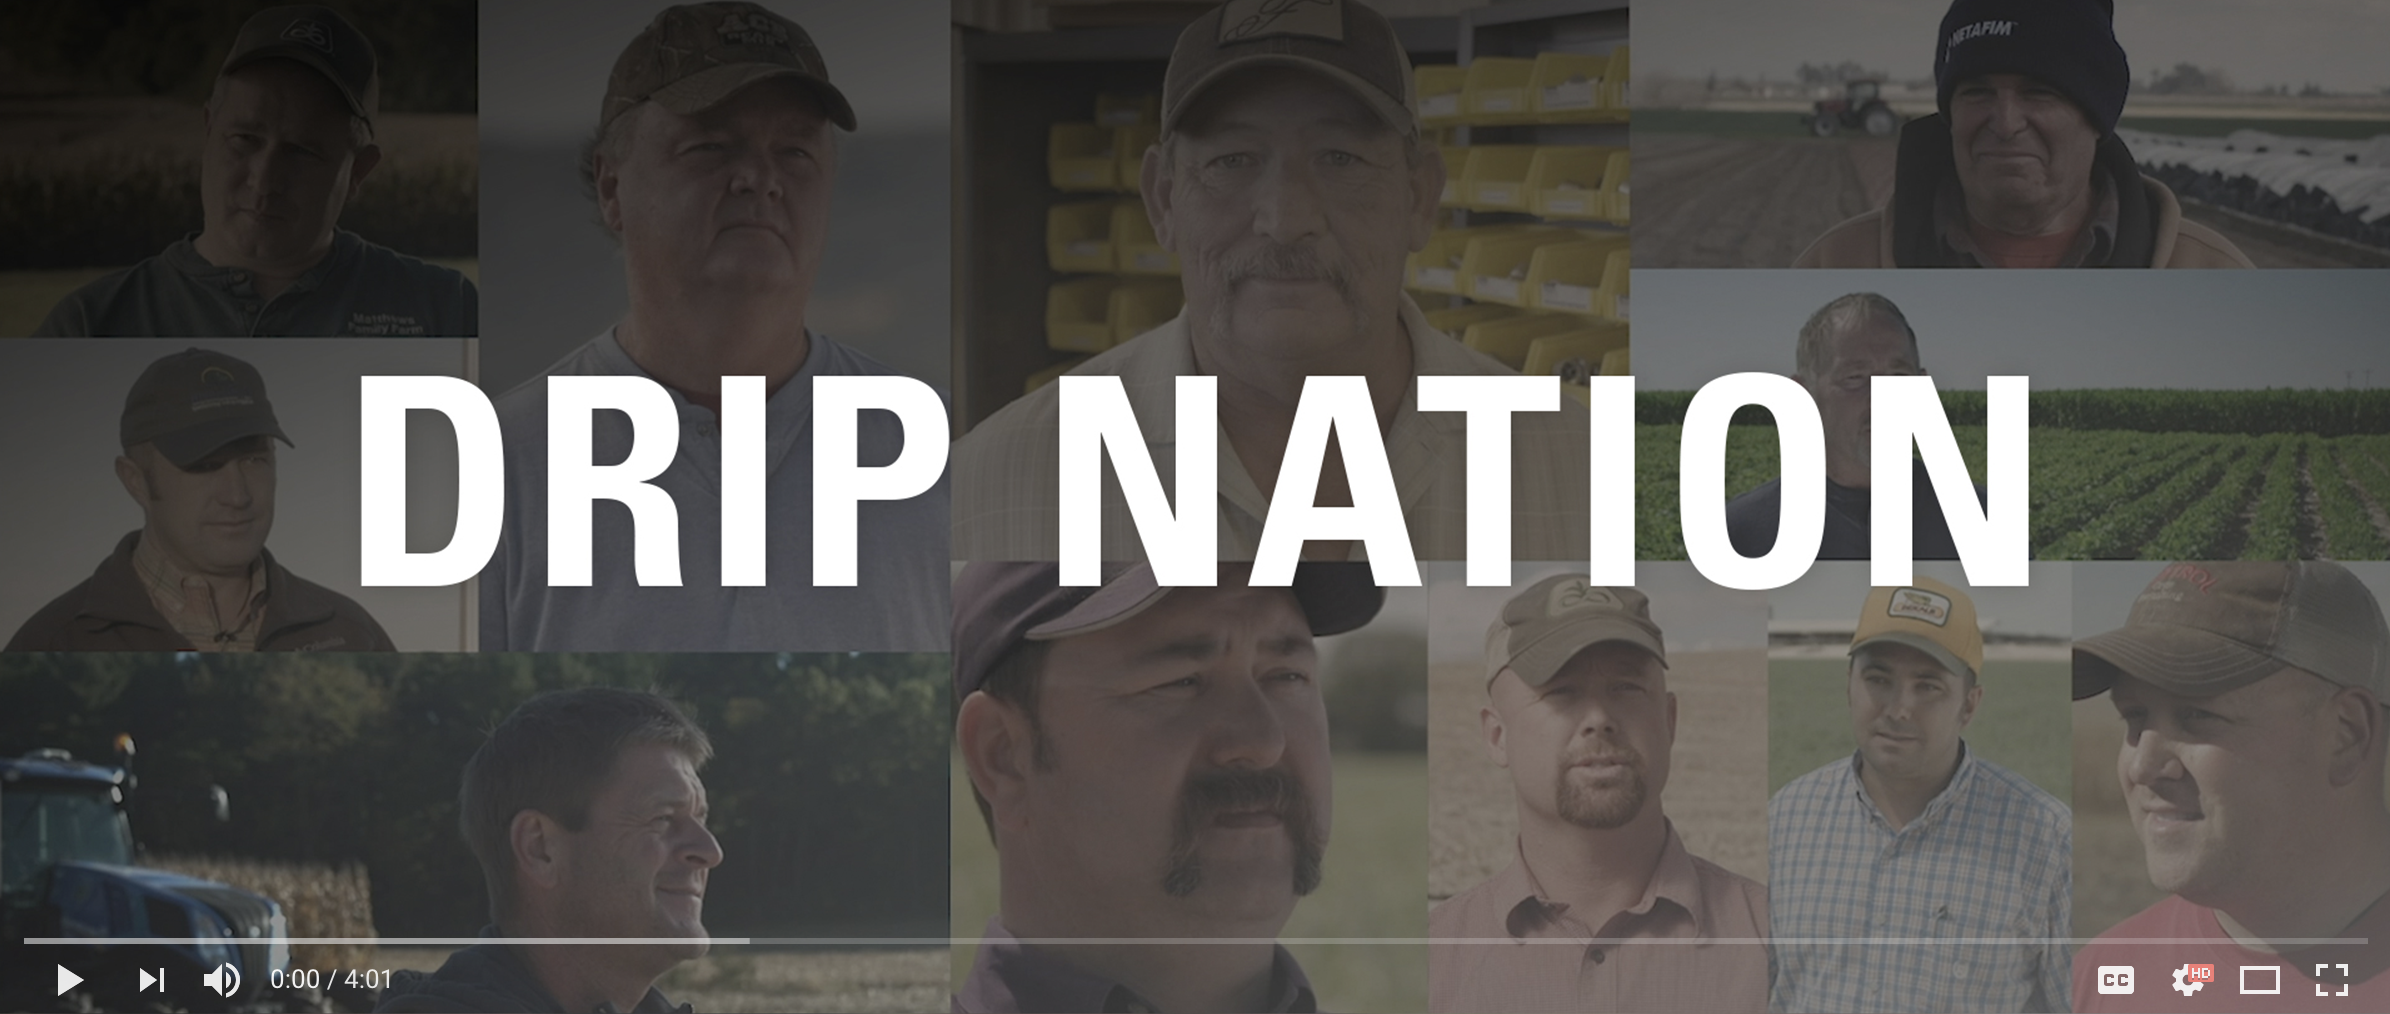 Collage of farmers with "DRIP NATION" text overlay and agricultural scenes